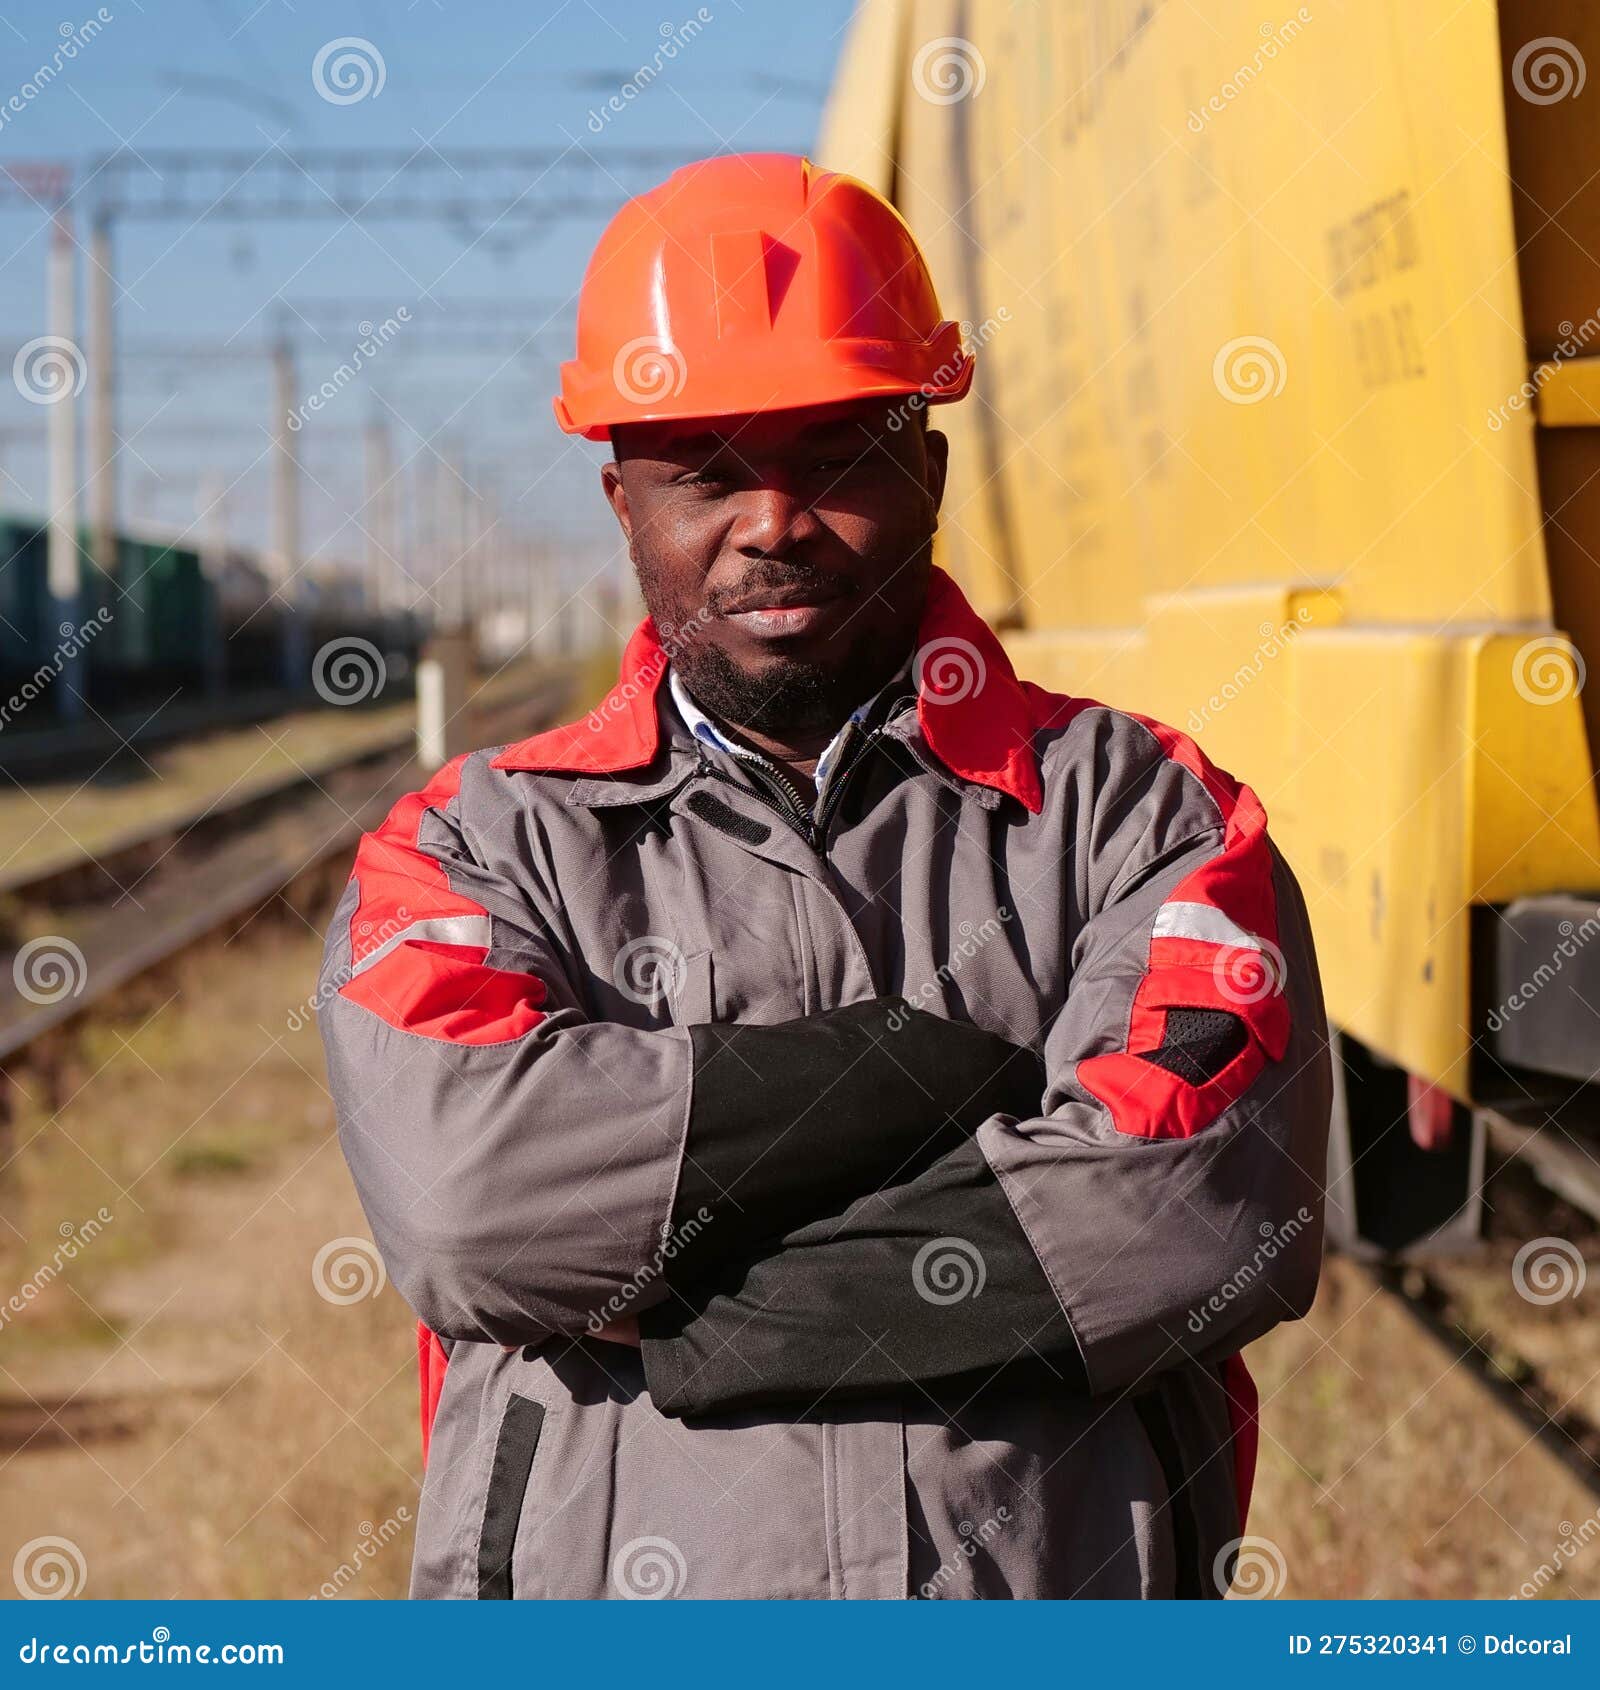 Railroad Man in Uniform and Red Hard Hat Look at the Camera Stock Image ...